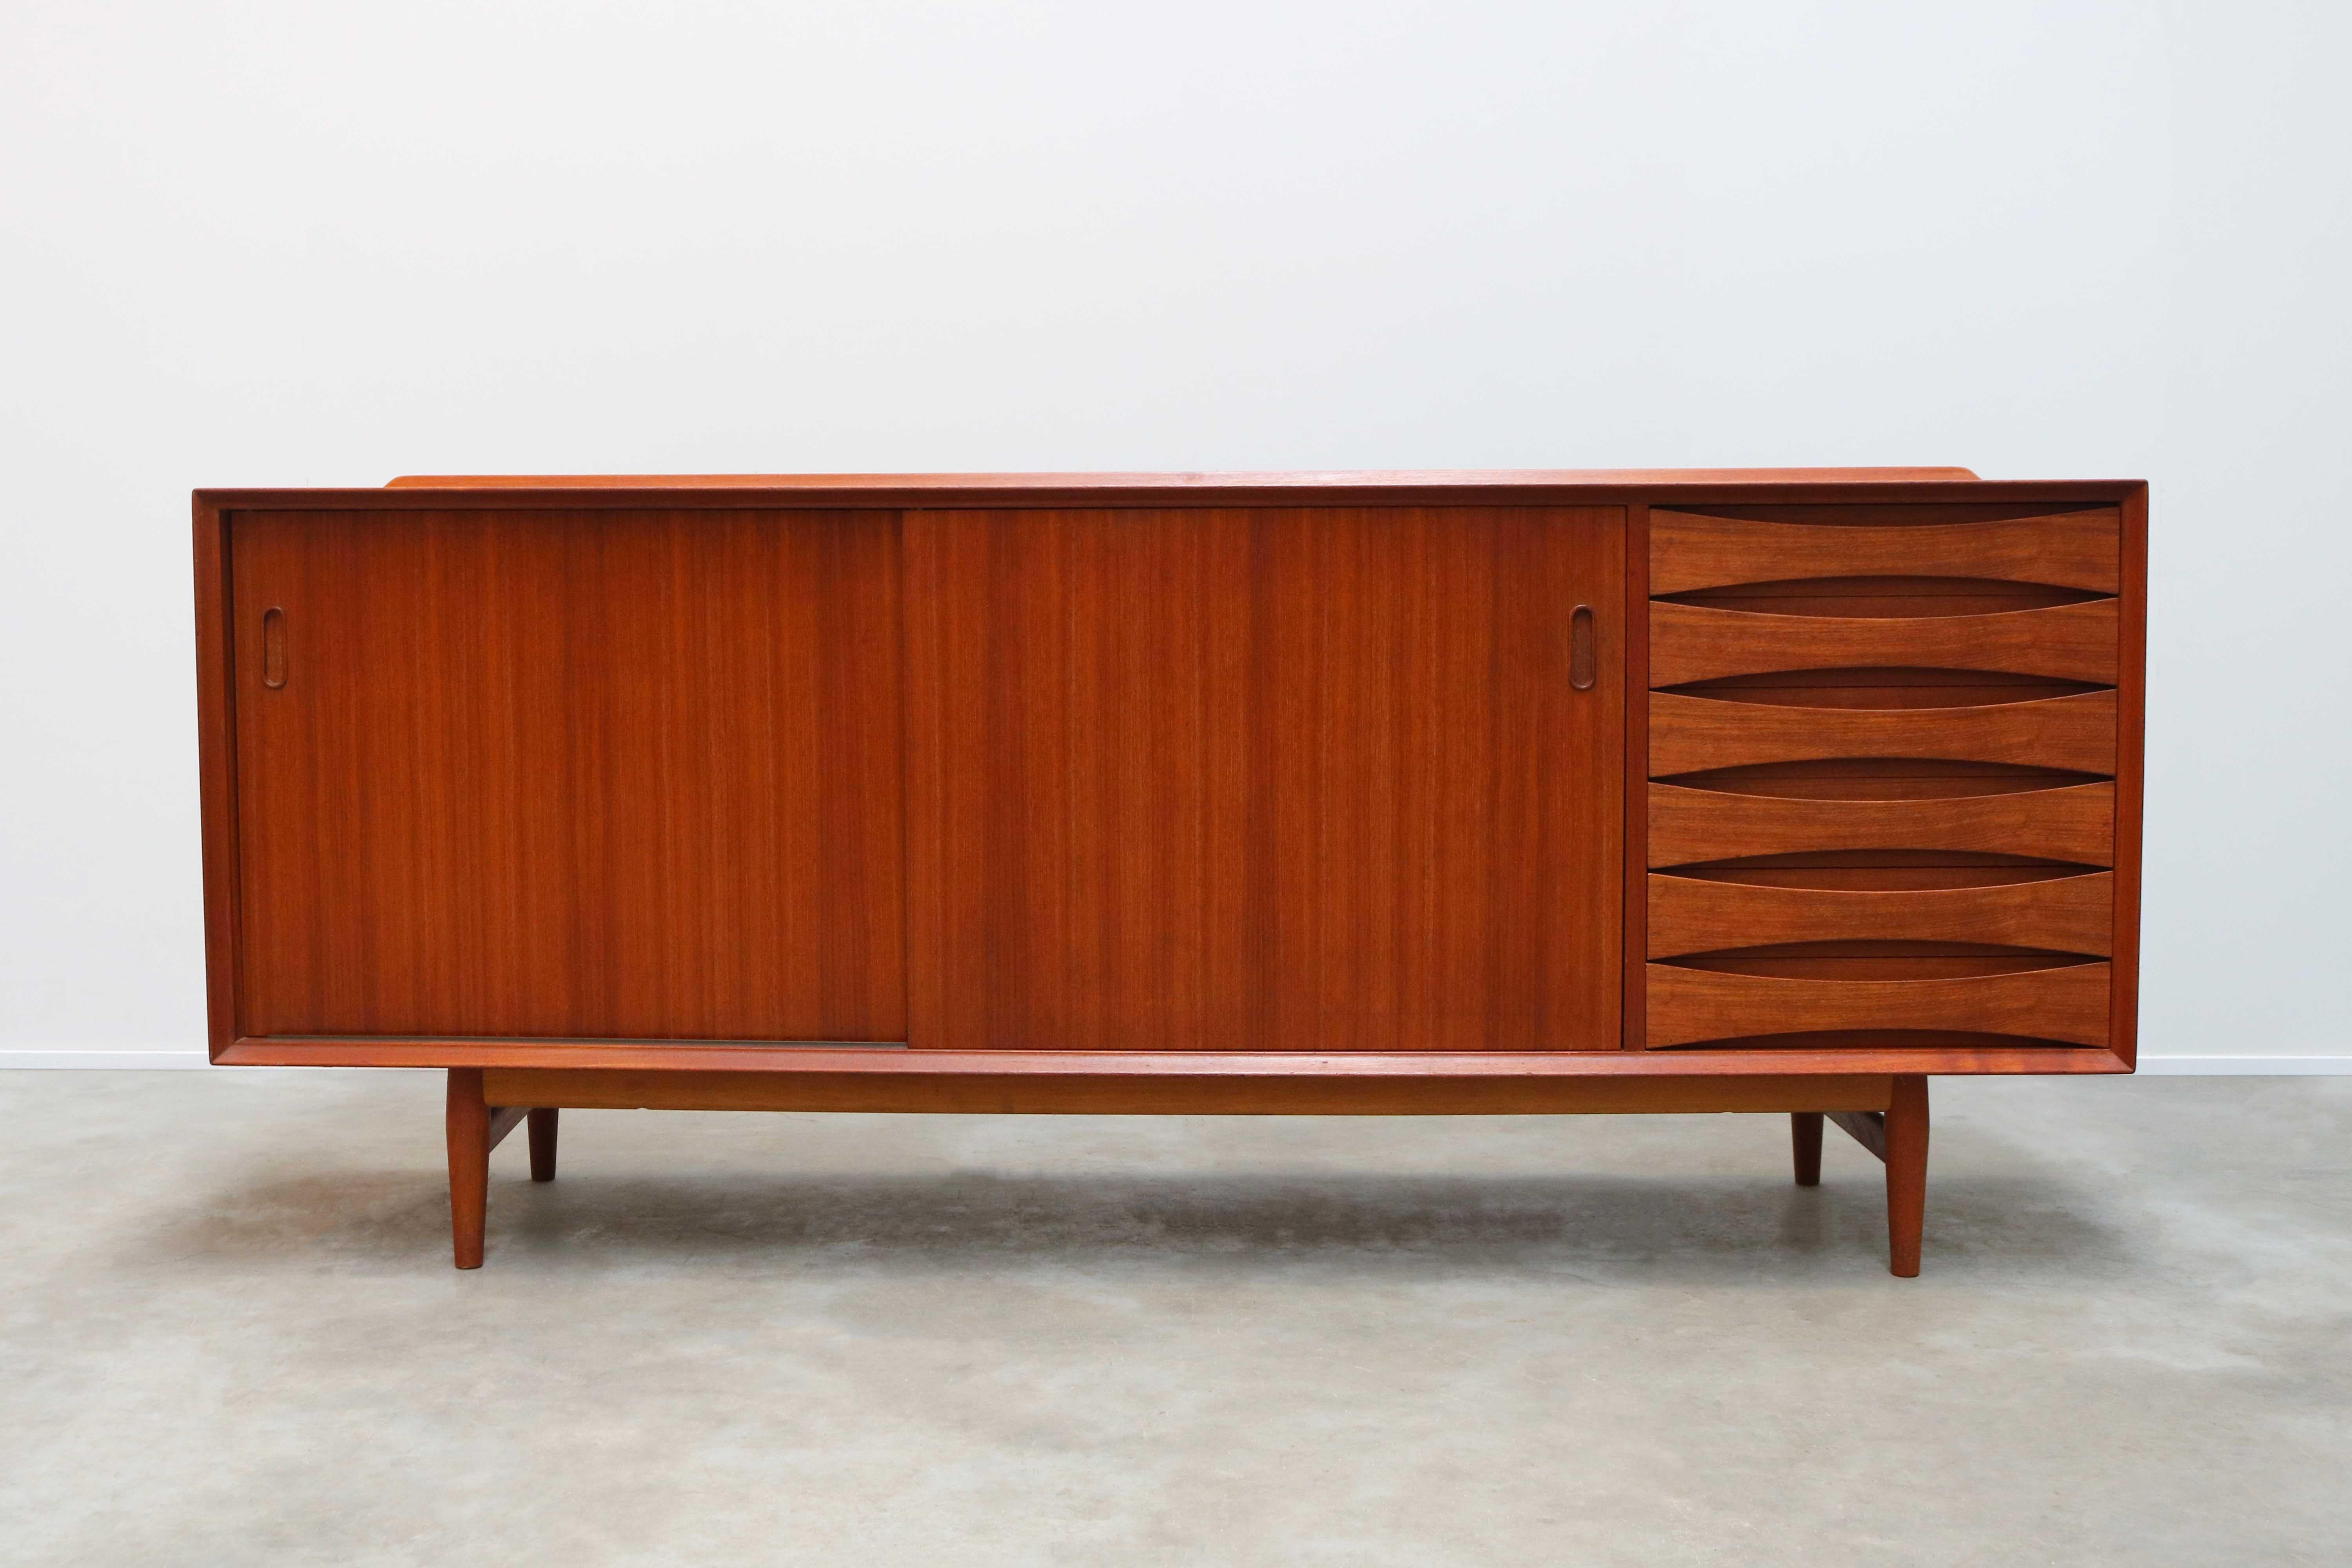 Wonderful Danish design sideboard model: OS29 by Arne Vodder for Sibast Mobler in the 1950s. World famous for winning at the 1958 Triennale design award. The sideboard has 6 drawers and multiple adjustable shelves behind 2 sliding doors. The entire